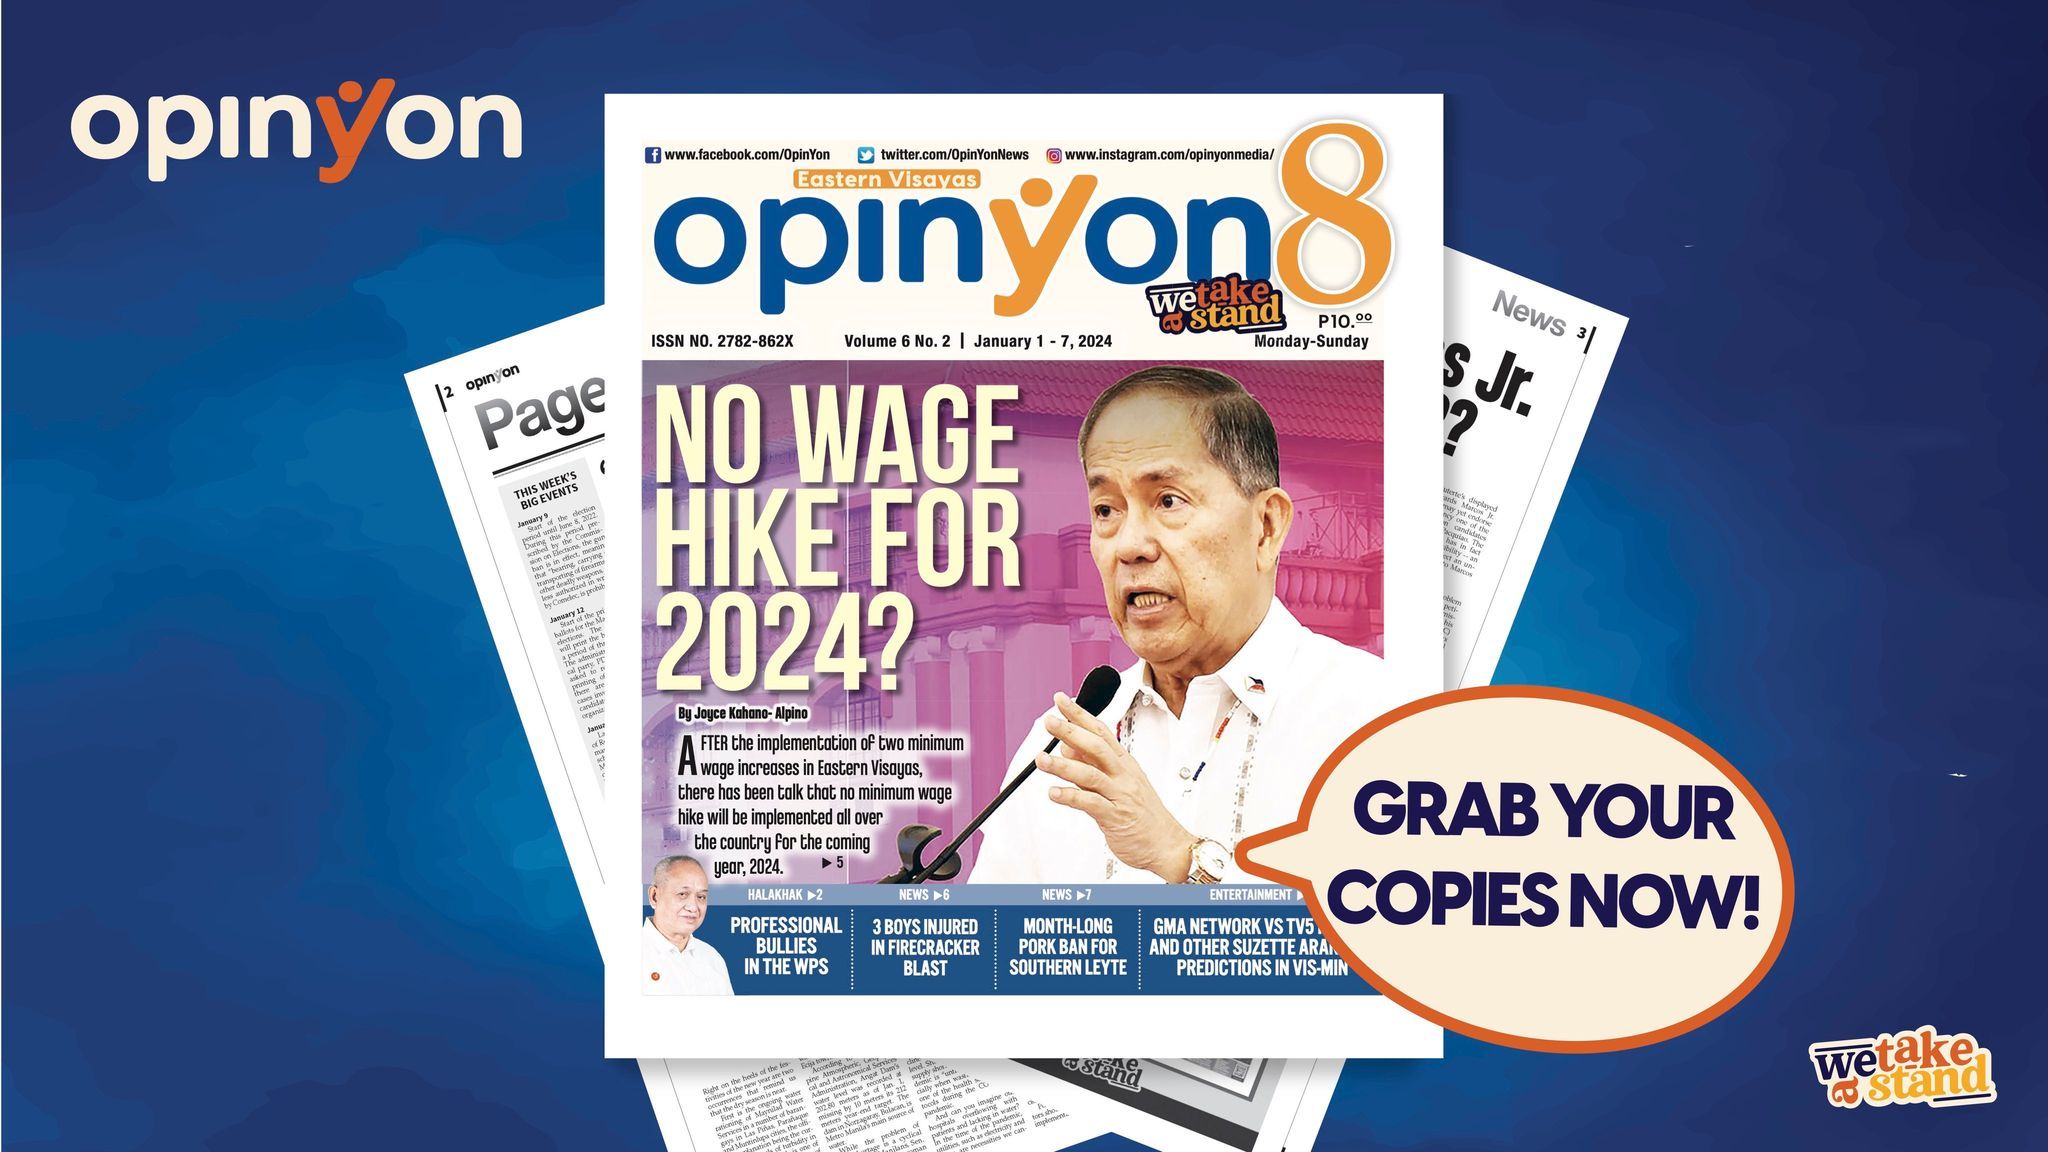 No Wage hike for 2024